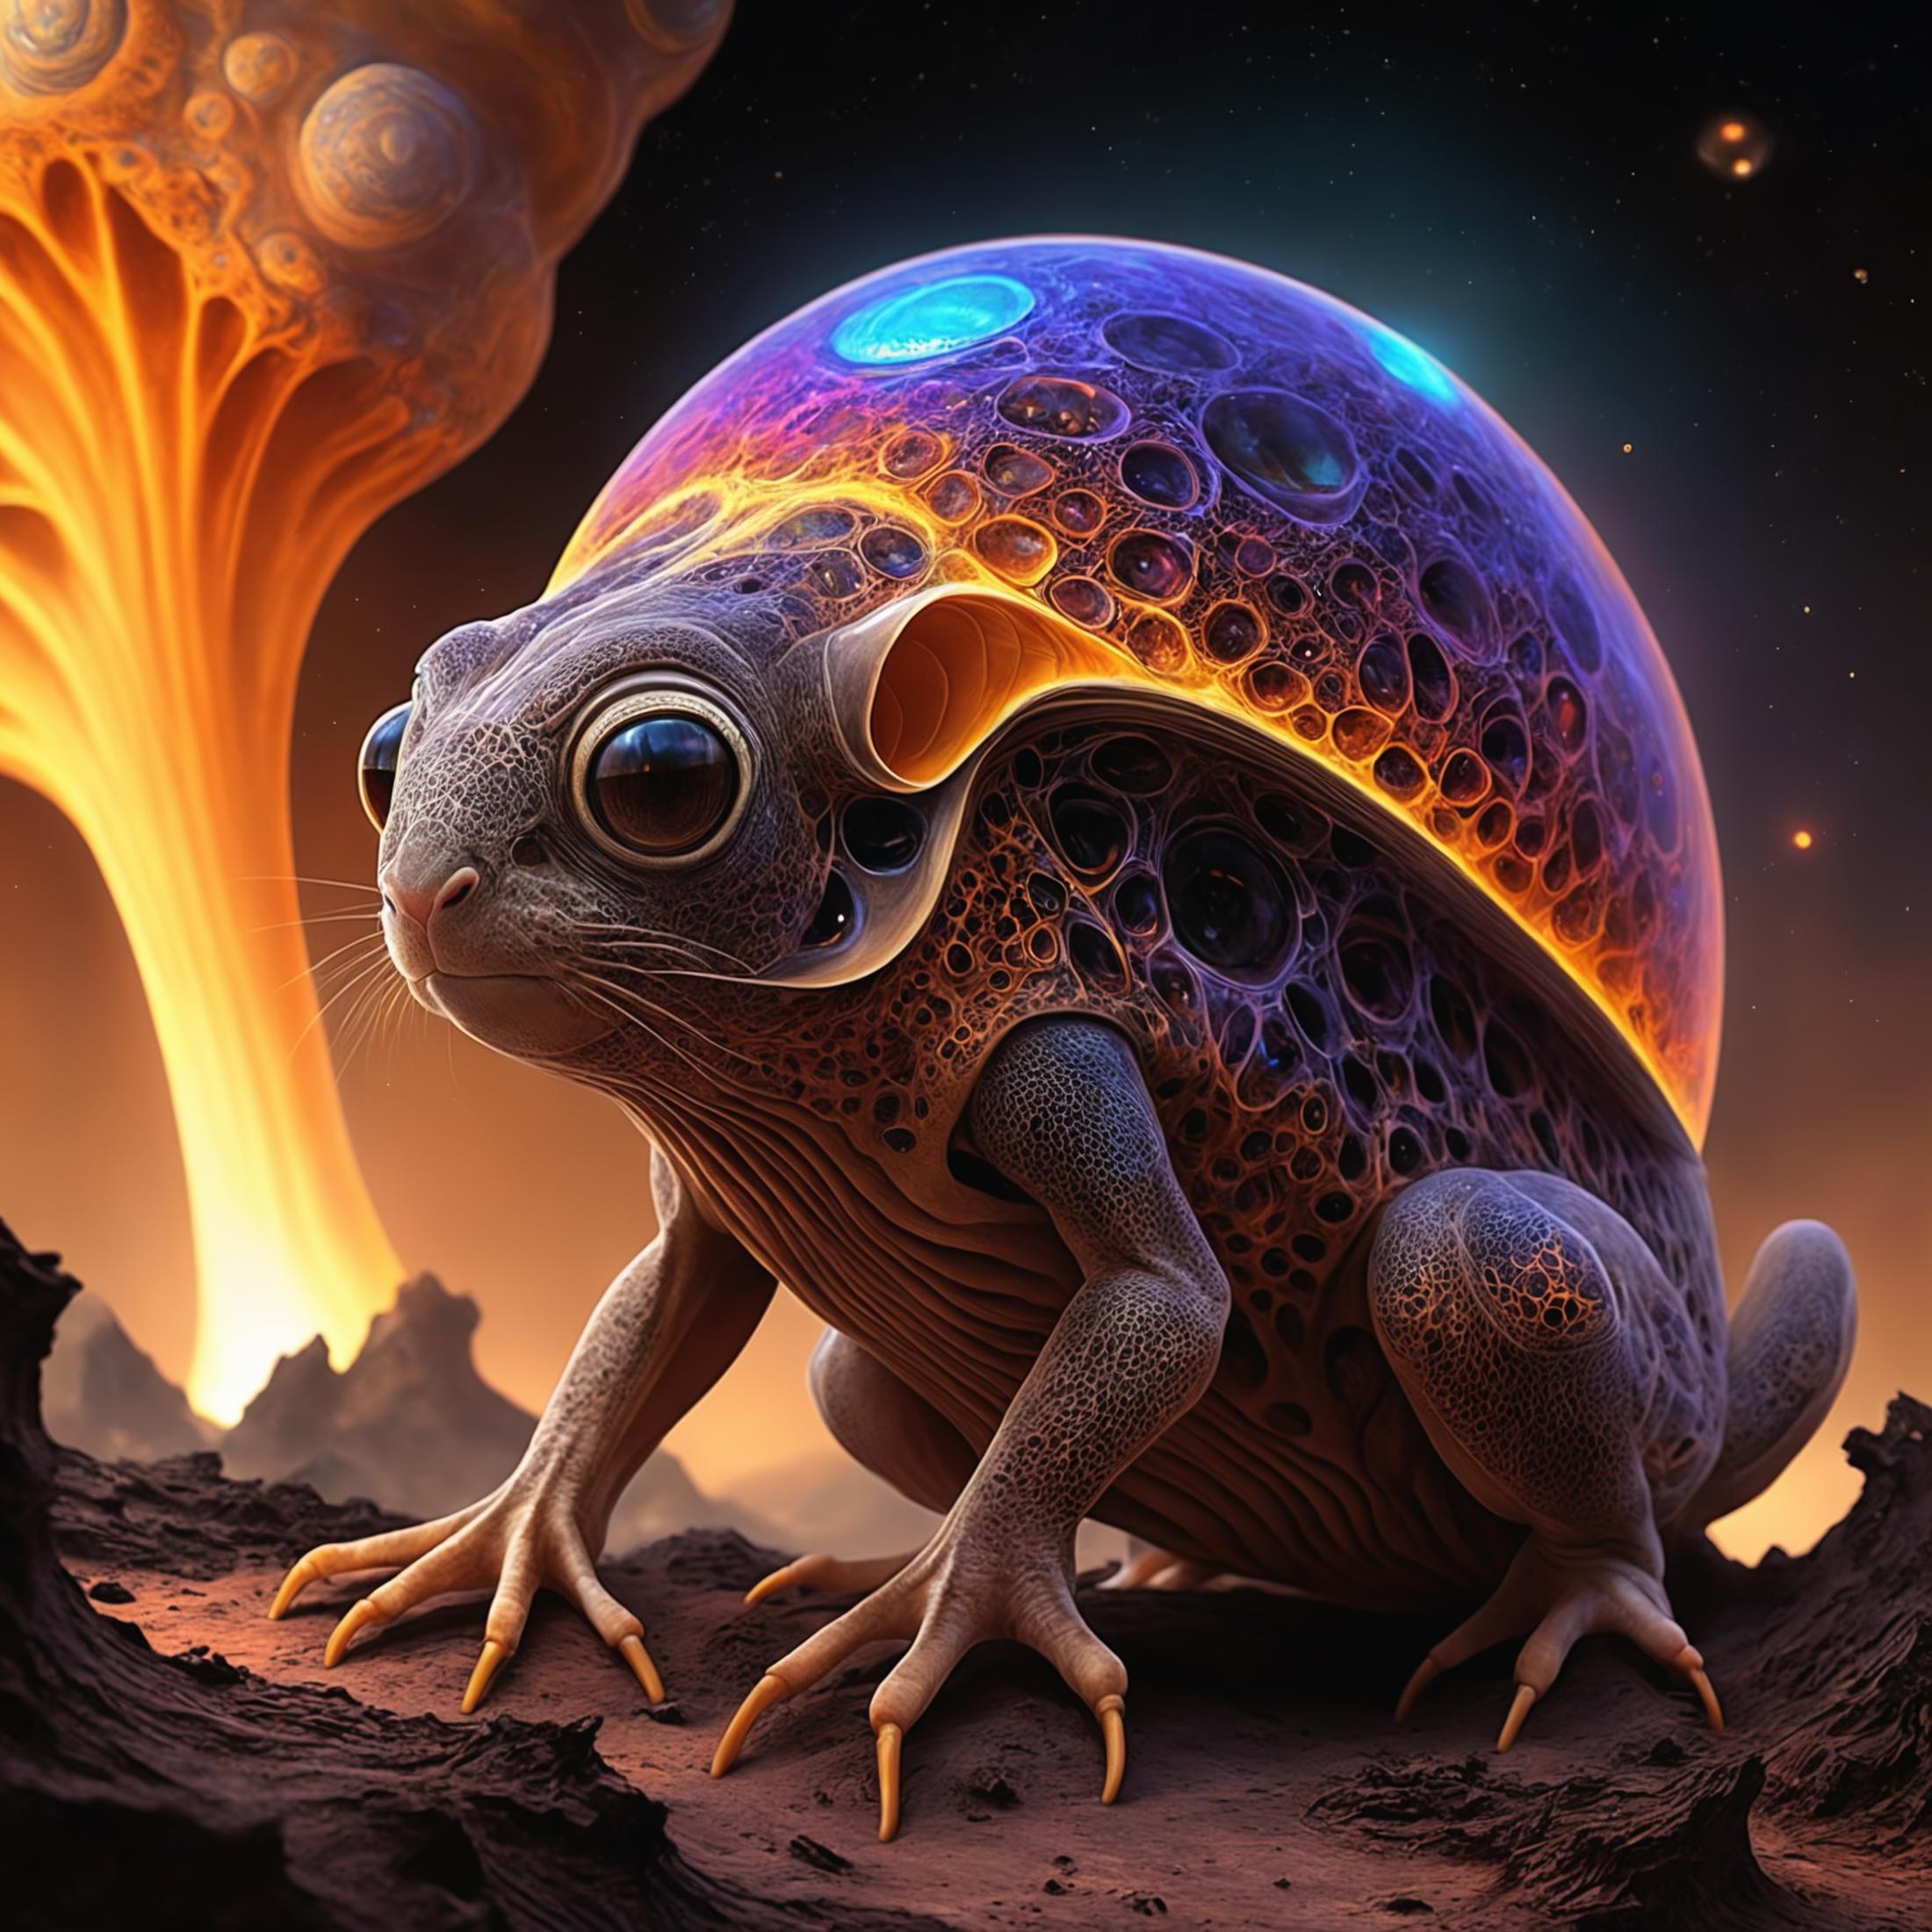 A fantastical artwork of a frog with a blue dome on its back and big eyes, standing on a rocky surface with a volcano in the background.